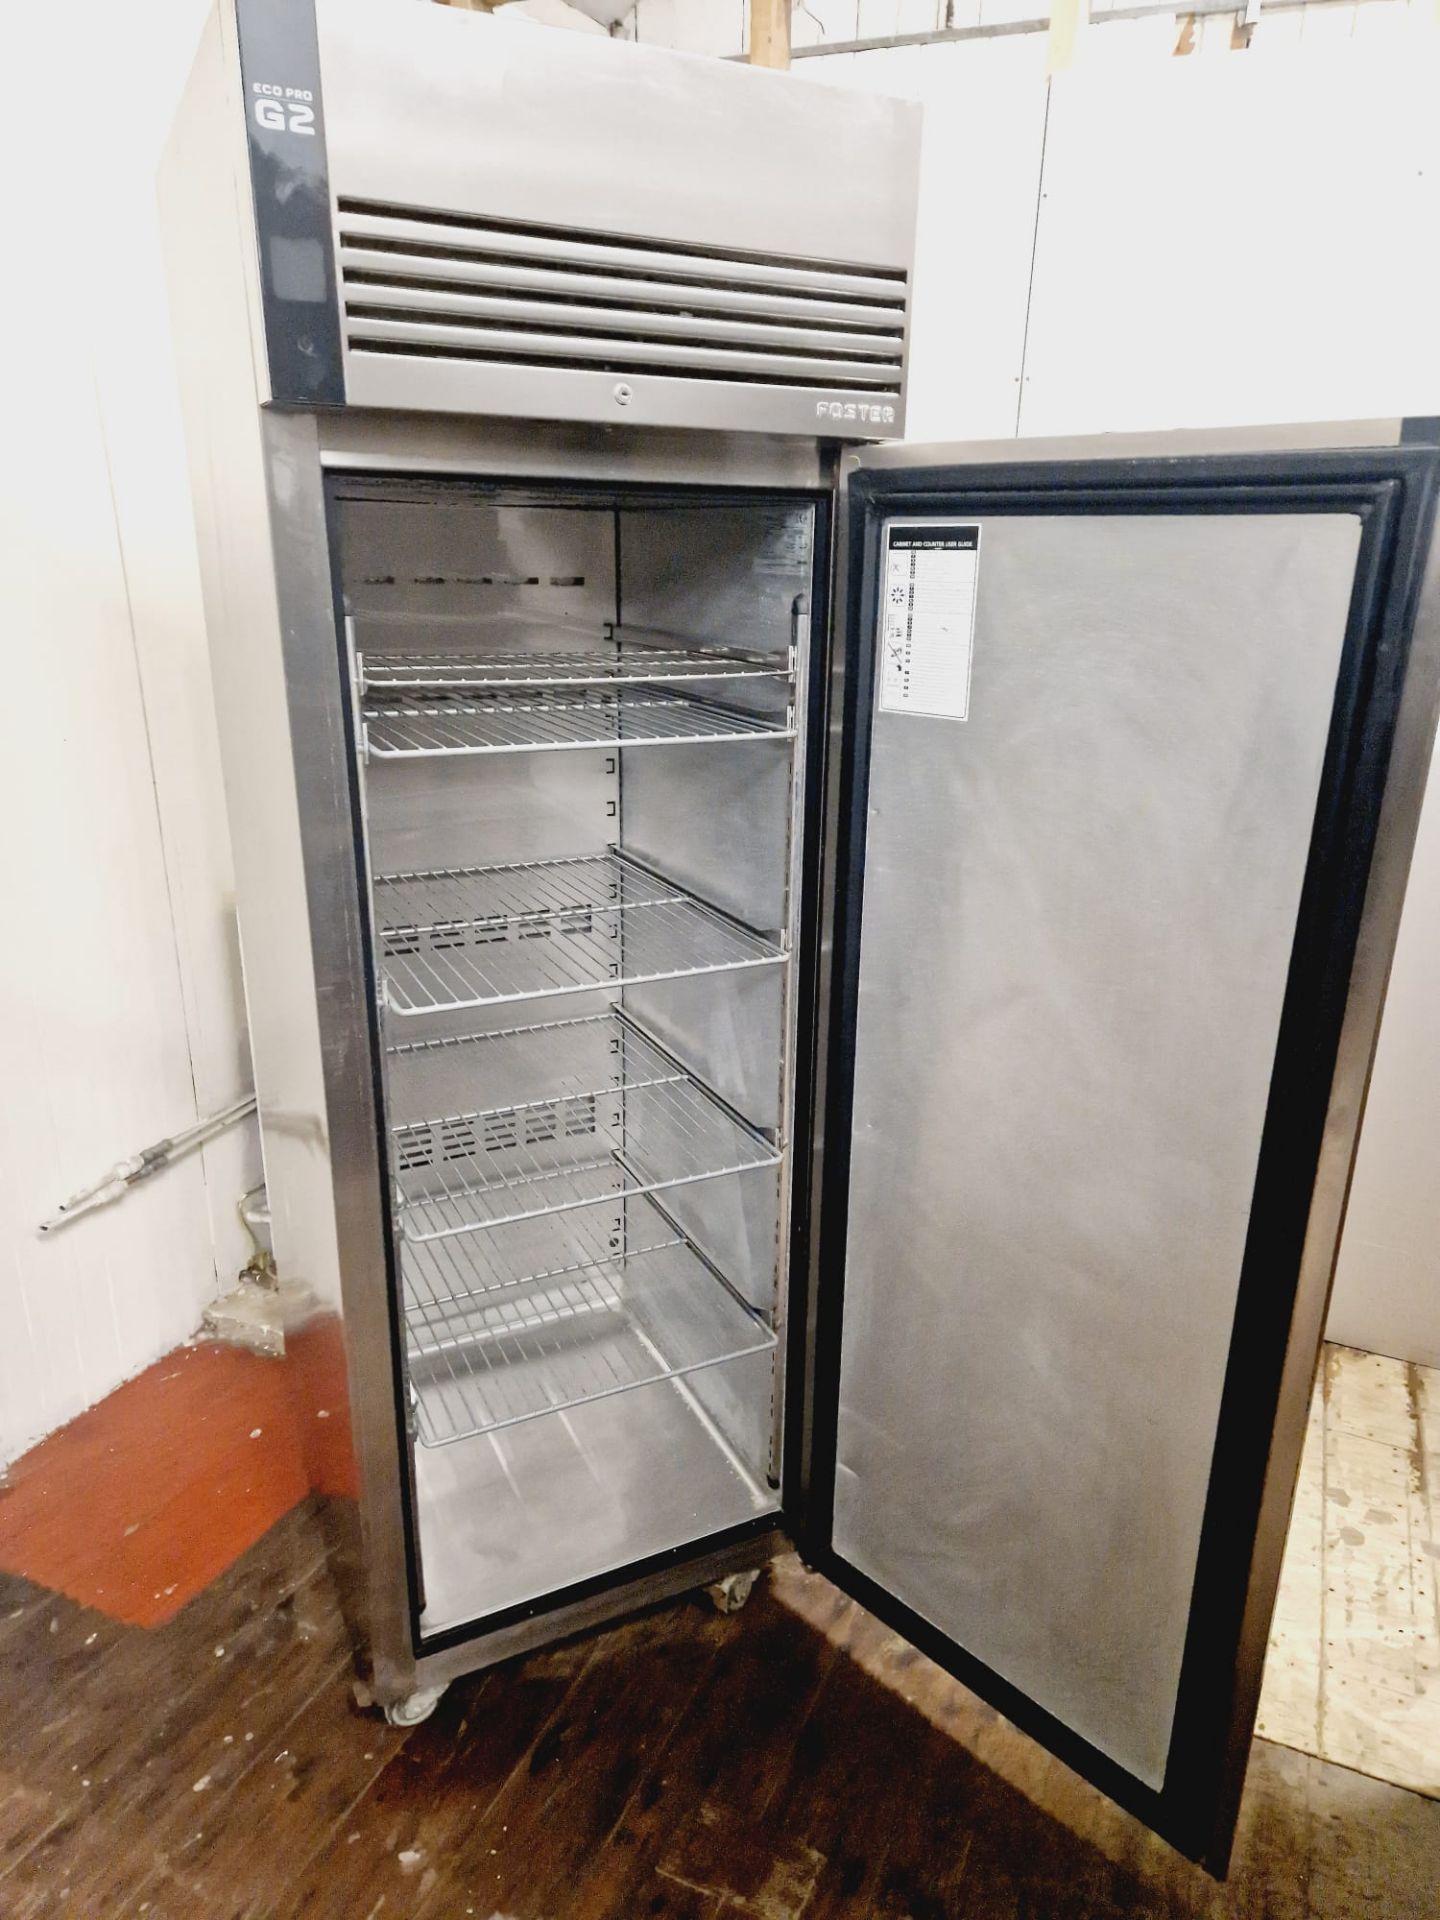 FOSTER G2 UPRIGHT FRIDGE FULLY WORKING  AND SERVICED - Bild 4 aus 4